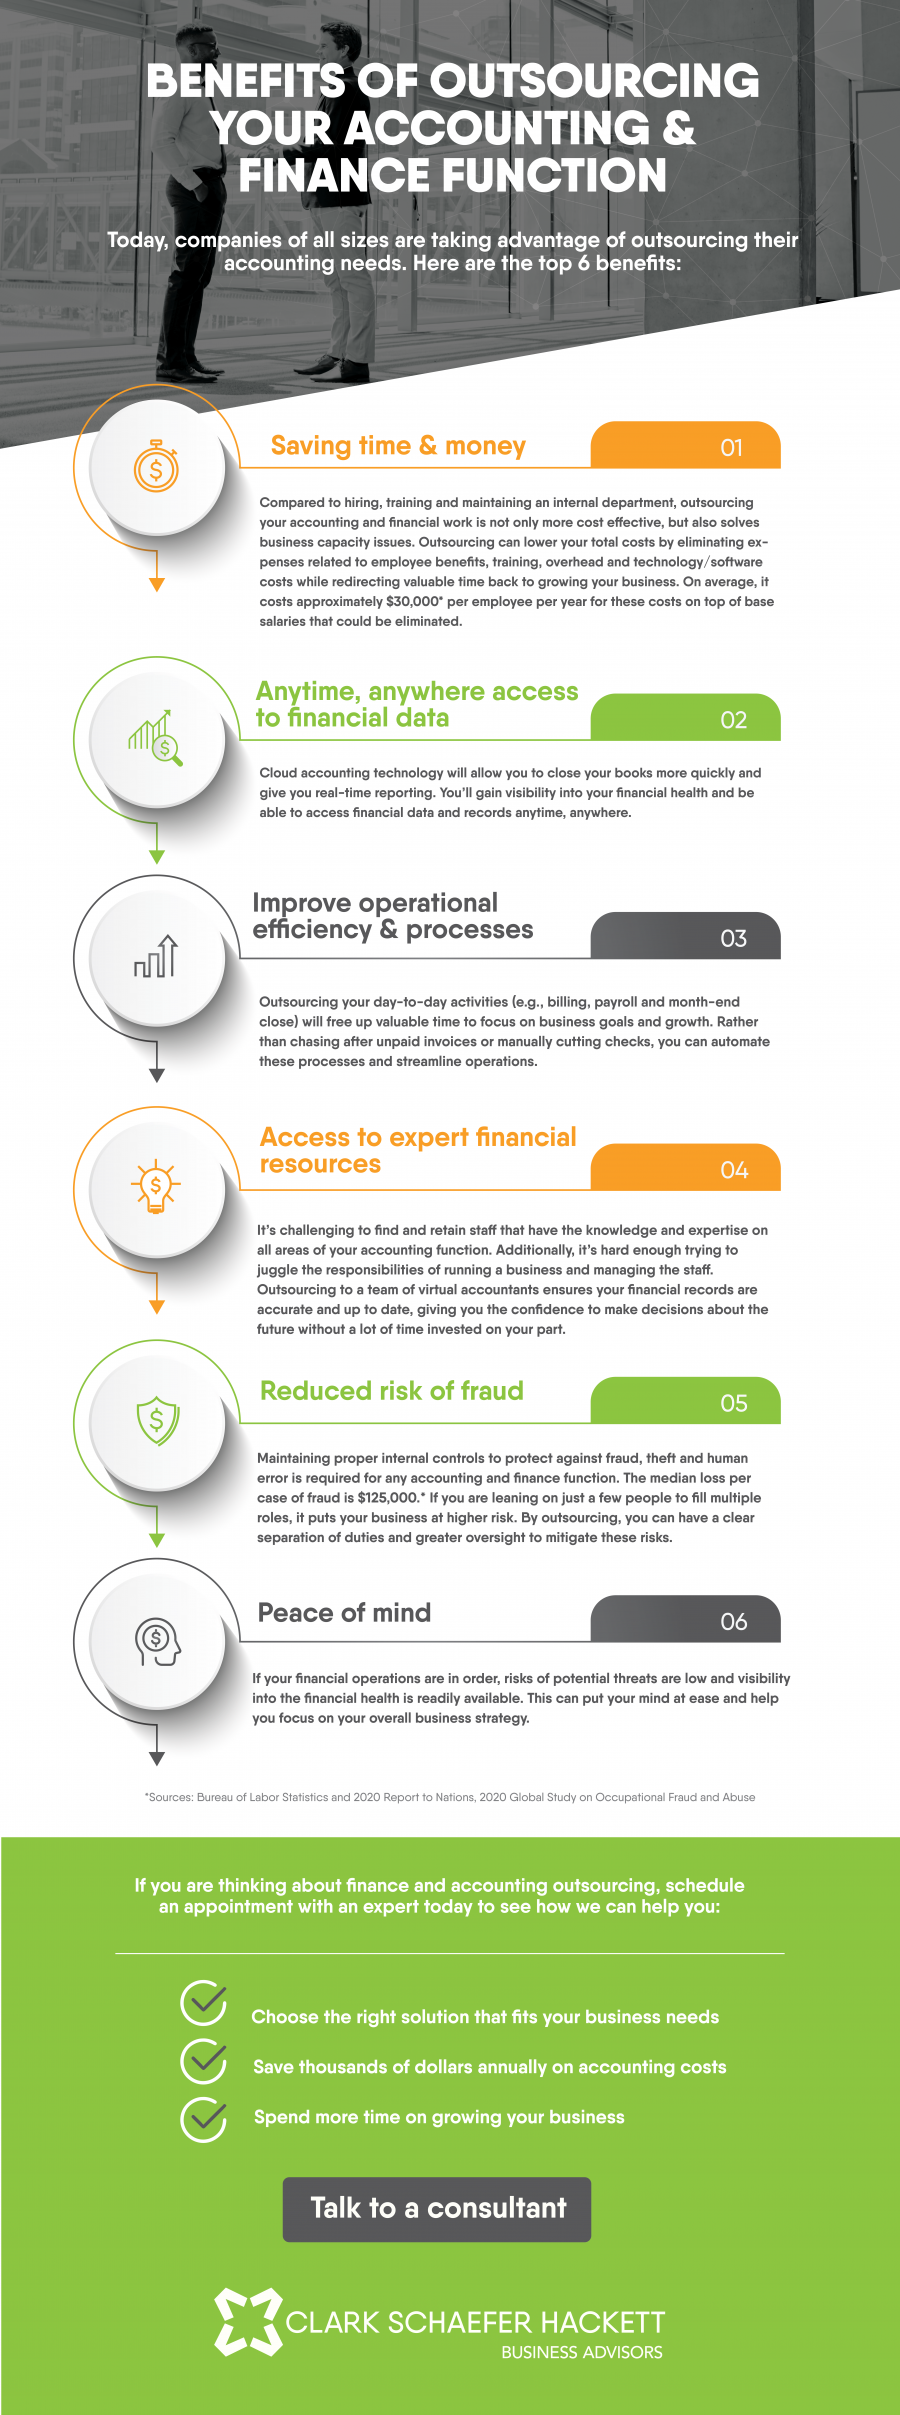 6-Benefits-Outsourcing-infographic